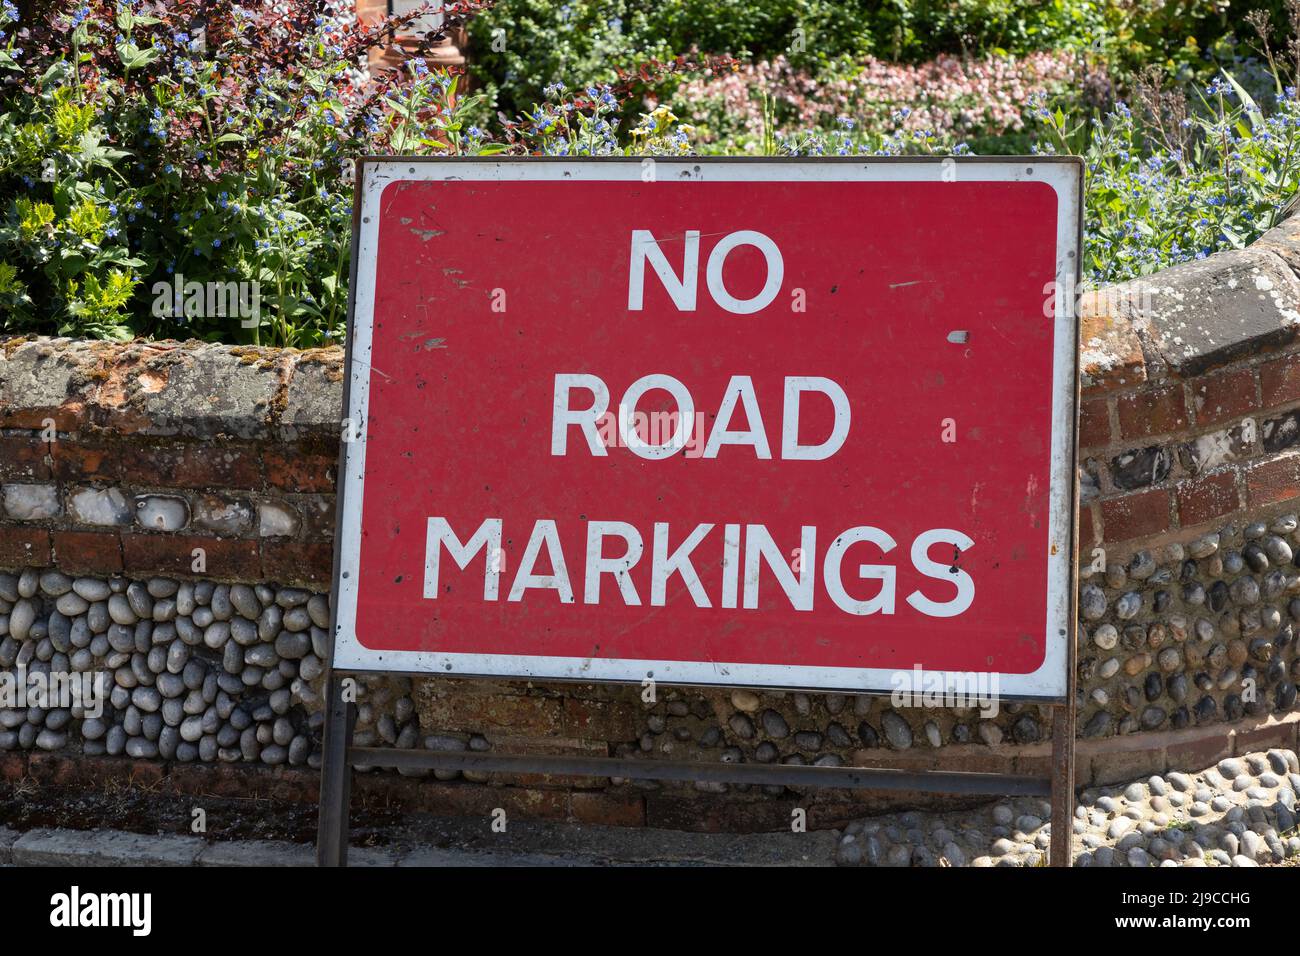 No Road Markings UK Road sign warning drivers of lack of markings on road Stock Photo